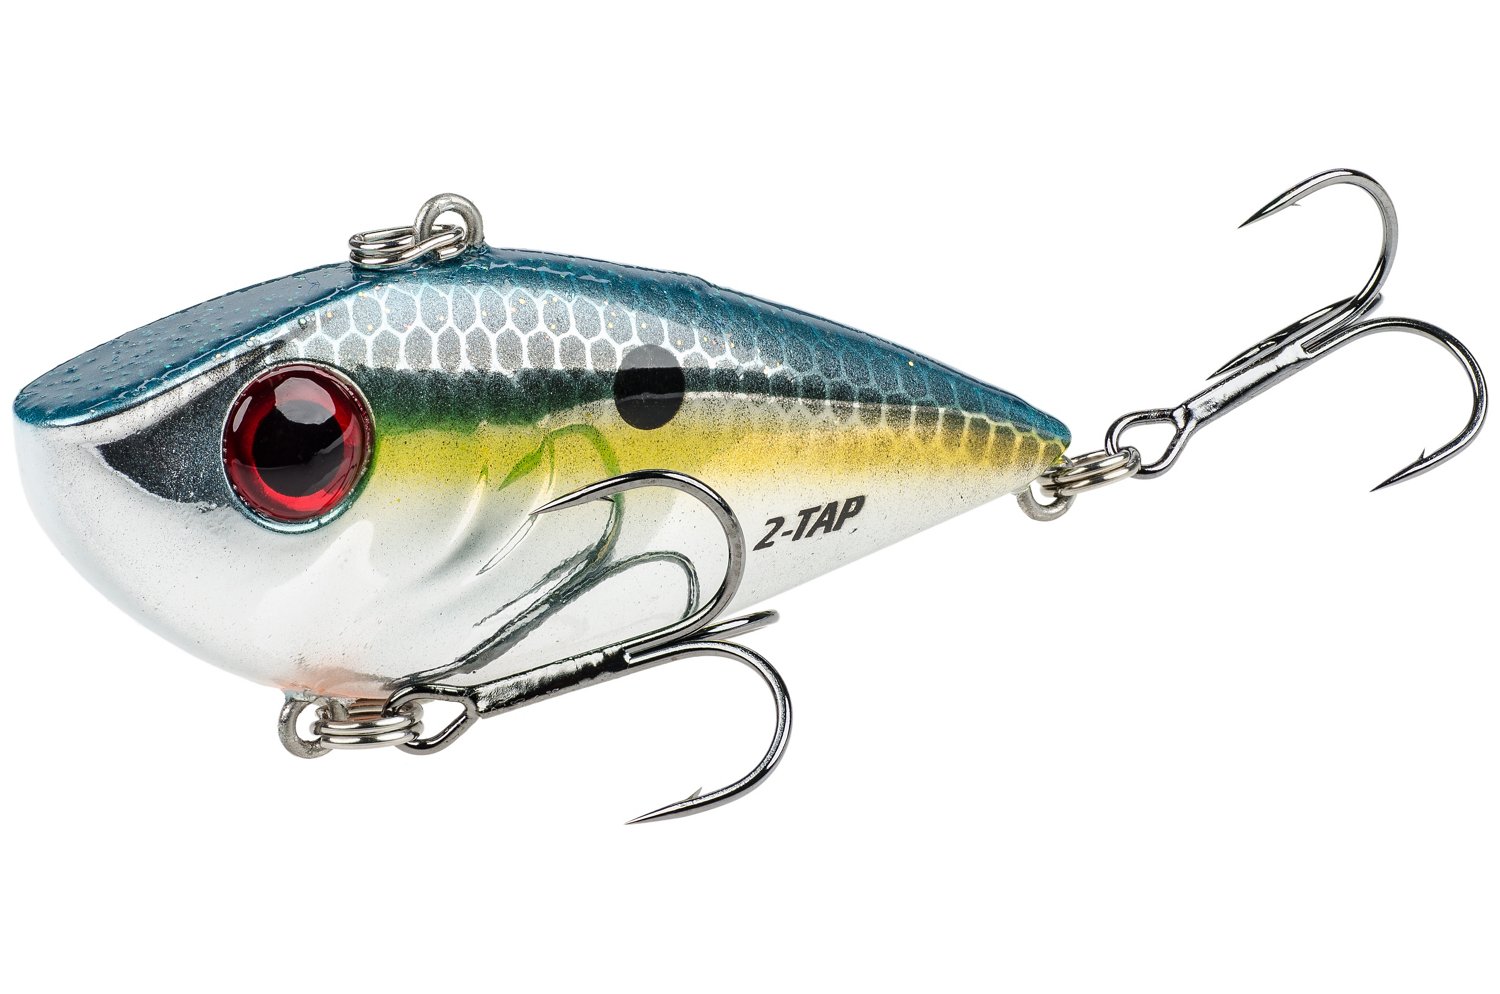 Red Eyed Shad Tungsten 2 Tap/Natural Bream 